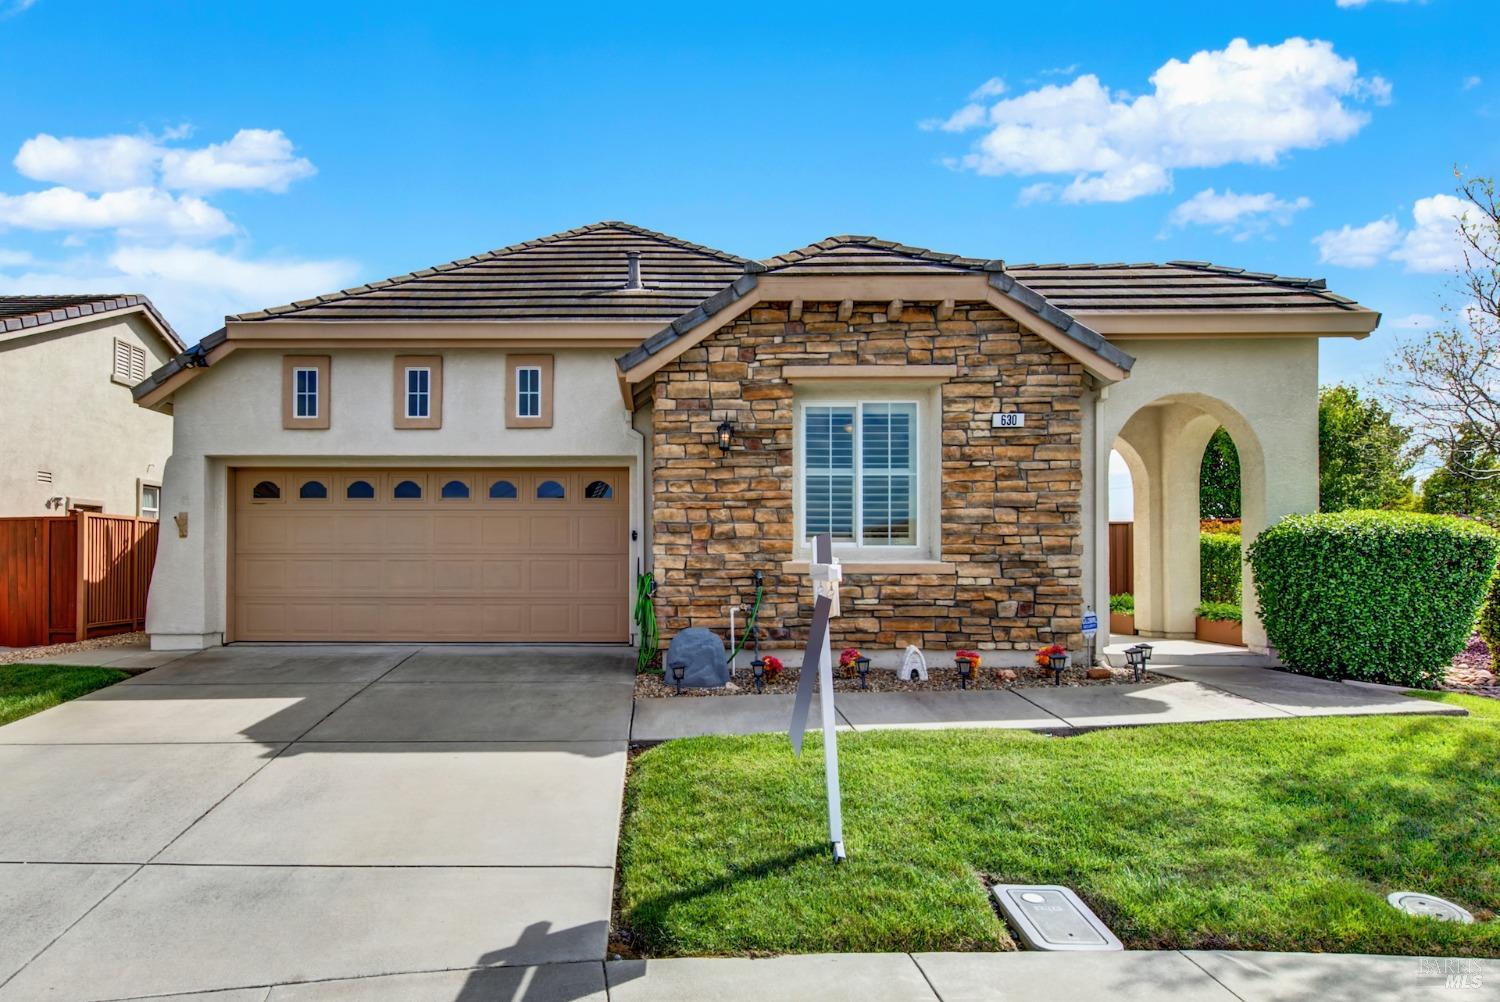 Photo of 630 Sweet Bay Cir in Vacaville, CA